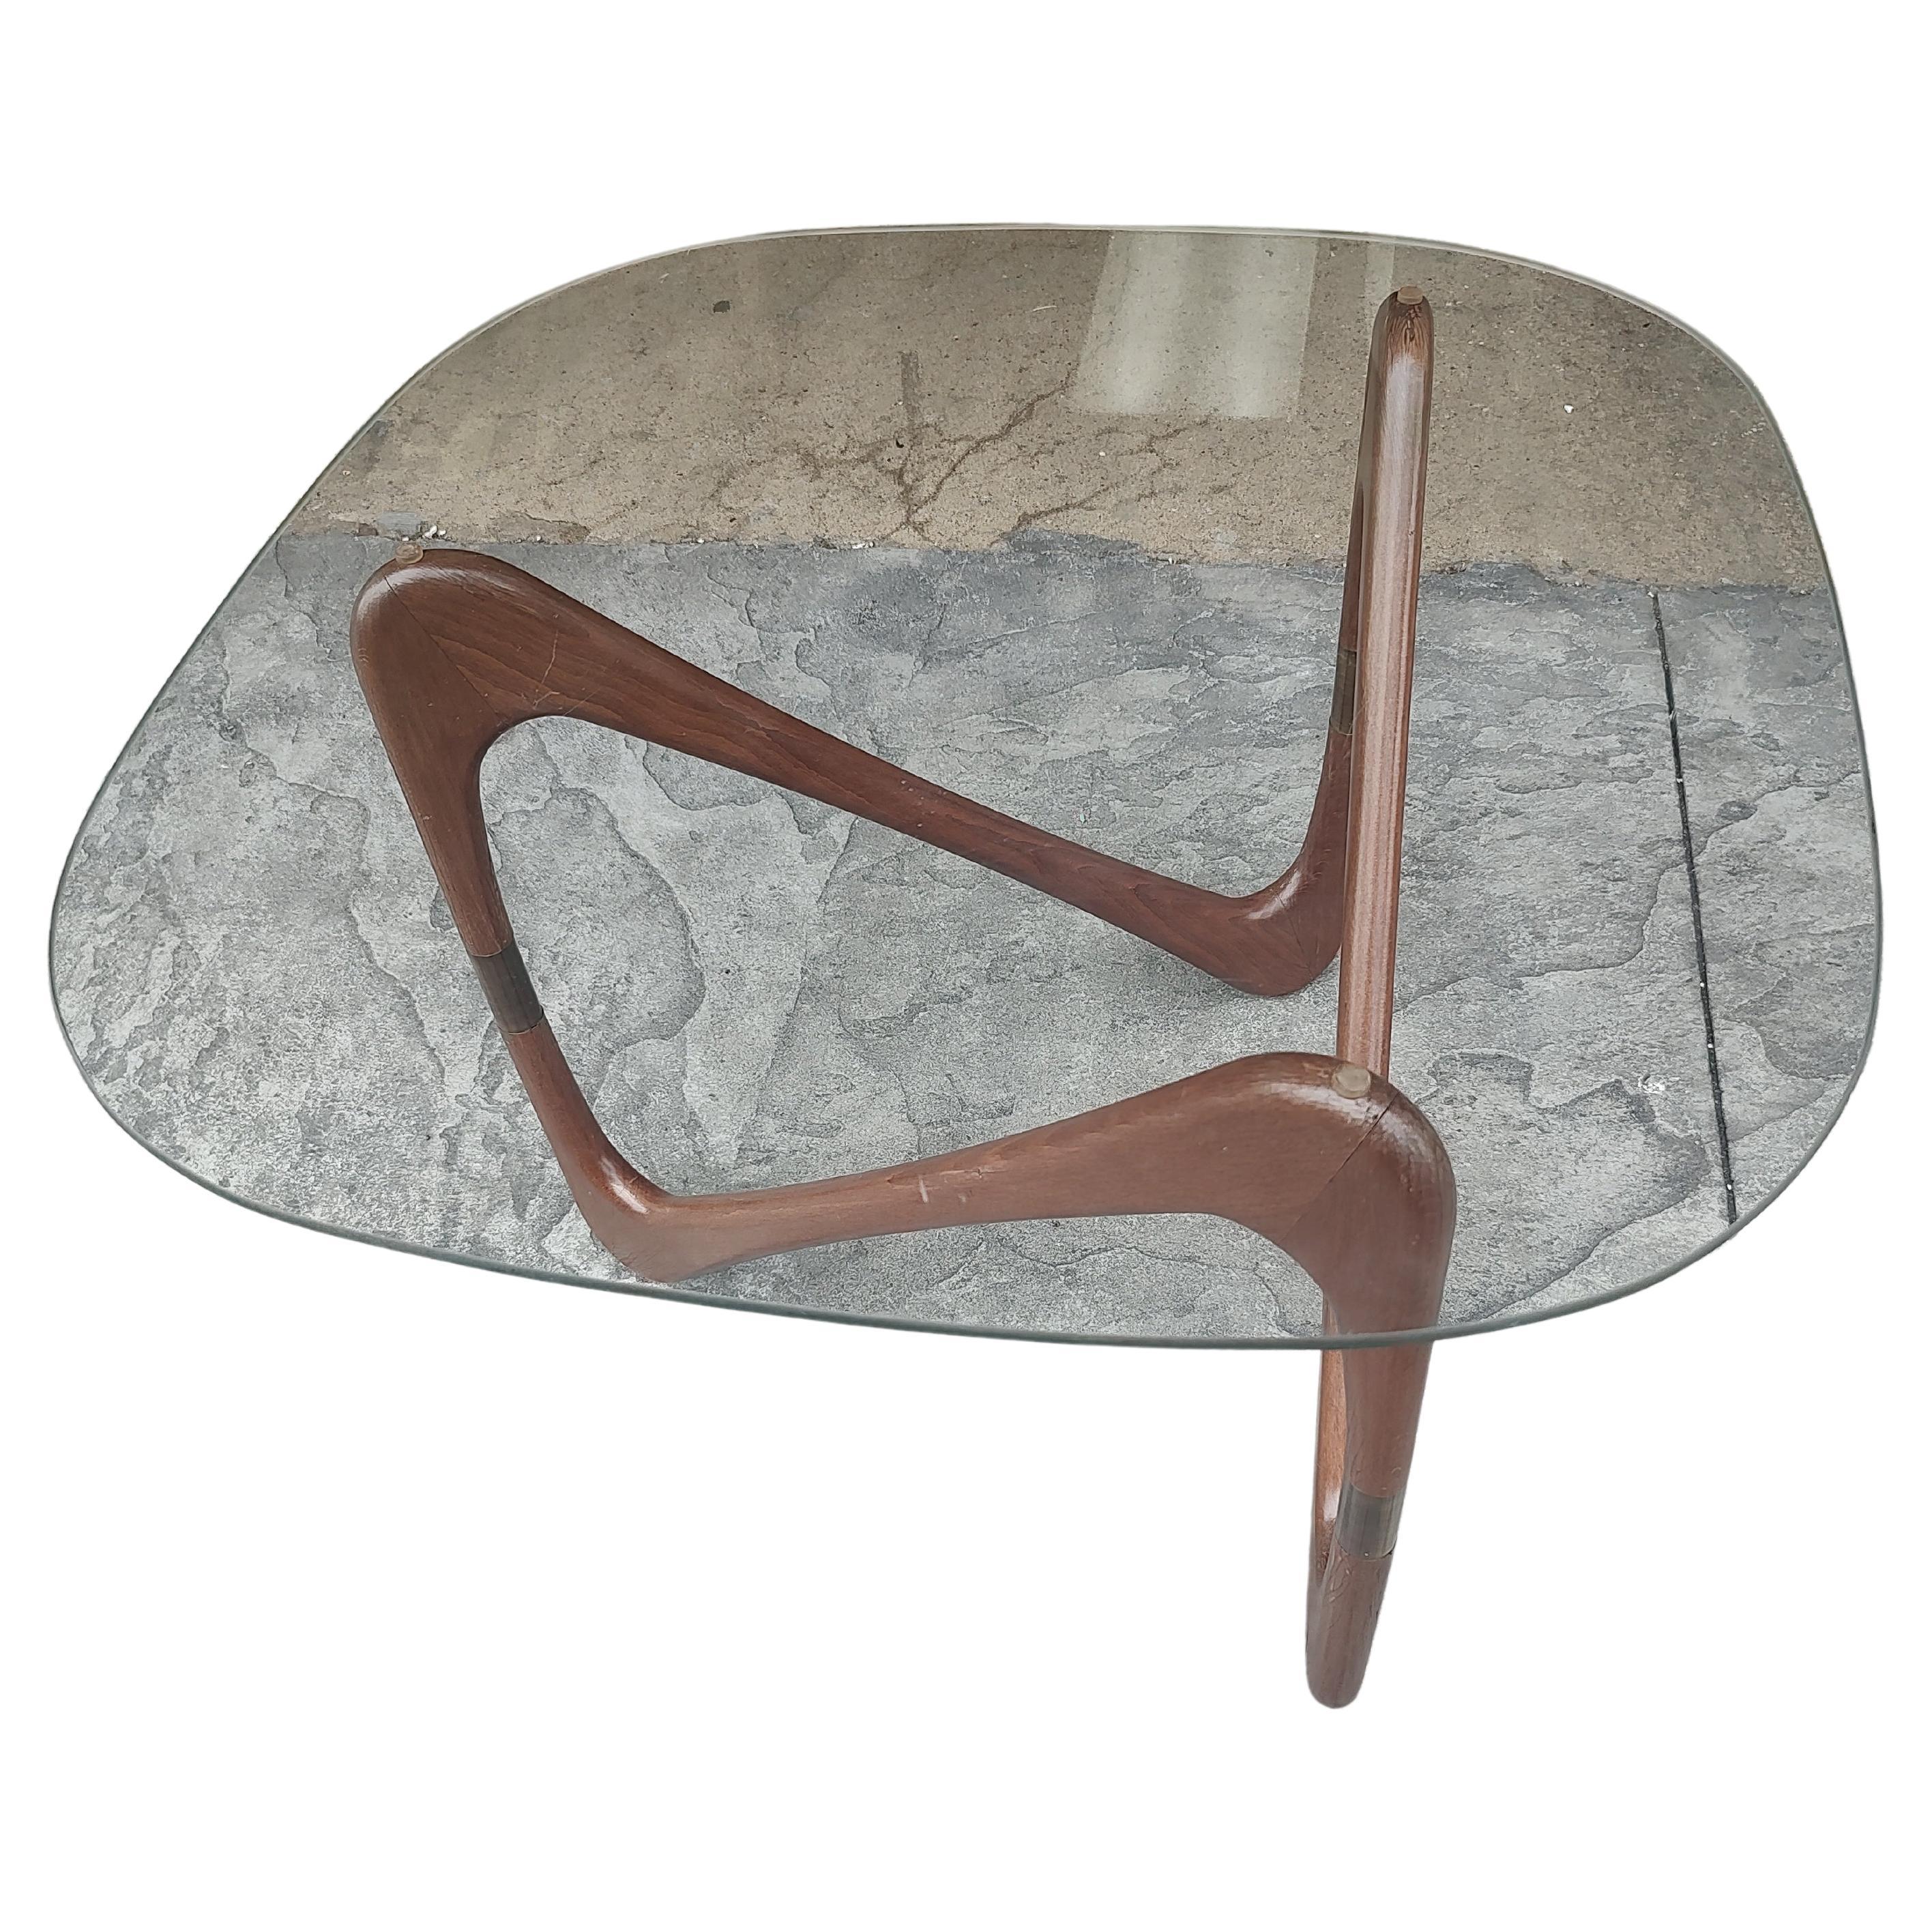 Unusual design with walnut curves and boomerang styling. Walnut loops connected by brass fitters. Square glass top 24.75 x 20h. Glass is perfect. Wood shows some age related wear to the finish.